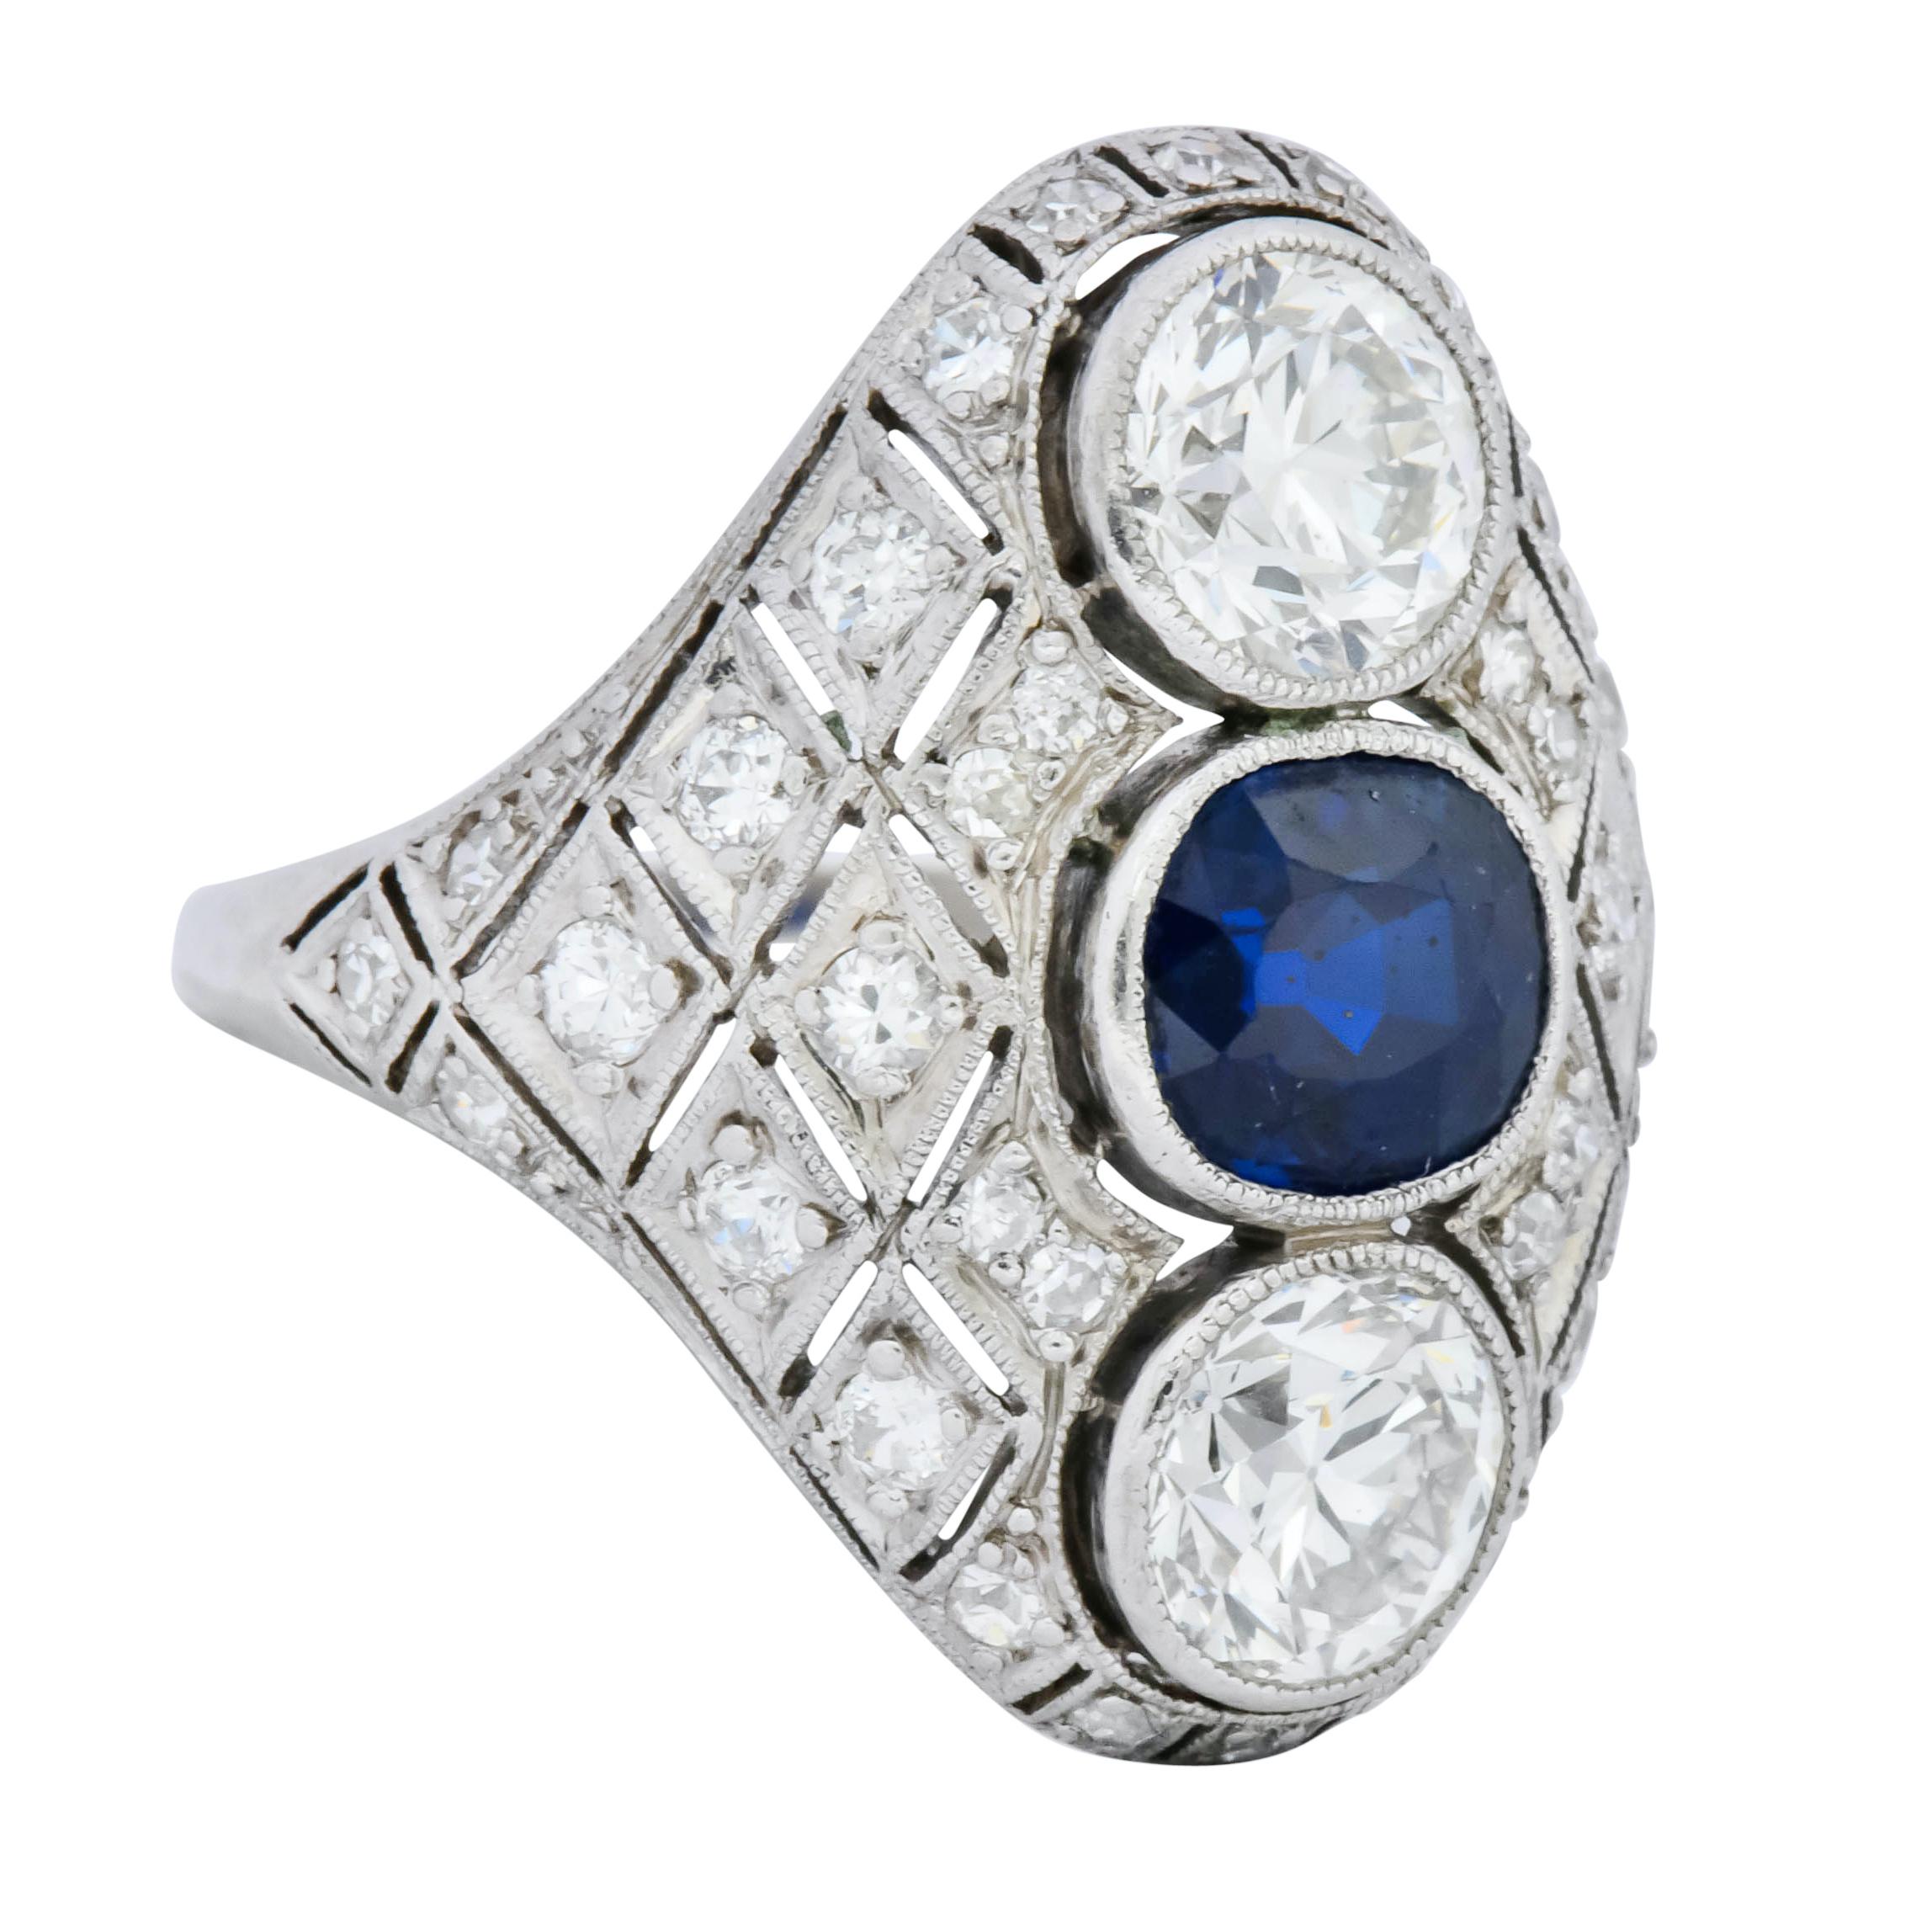 Centering a cushion cut sapphire weighing approximately 1.30 carats, transparent and a deep blue color

Flanked by two old European cut diamonds weighing approximately 1.80 carats, H-I color and VS clarity

All three bezel set North to South in a